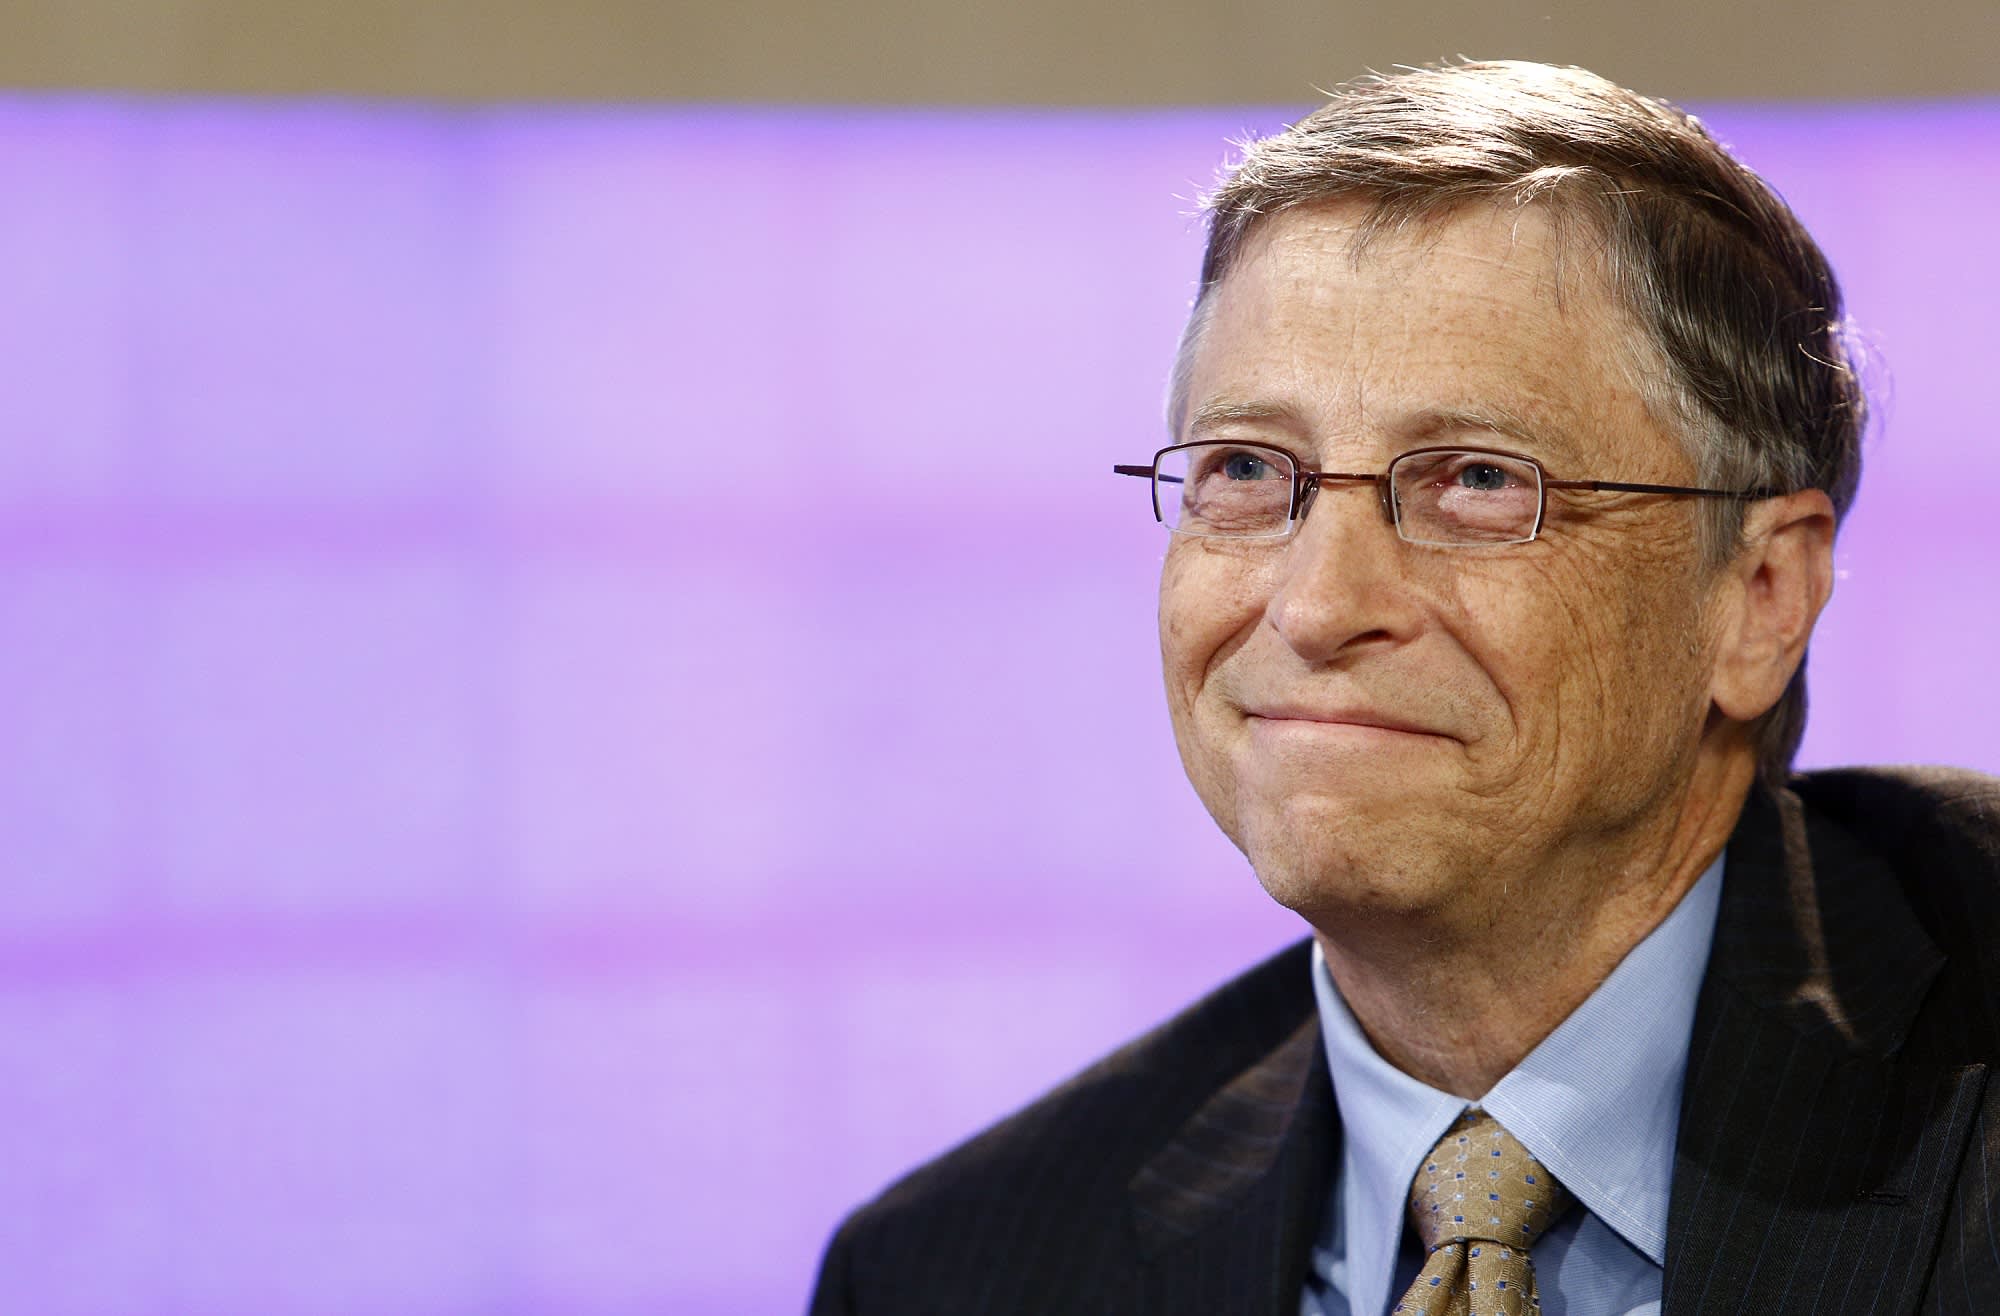 What Bill Gates learned from Washington state's teacher of the year